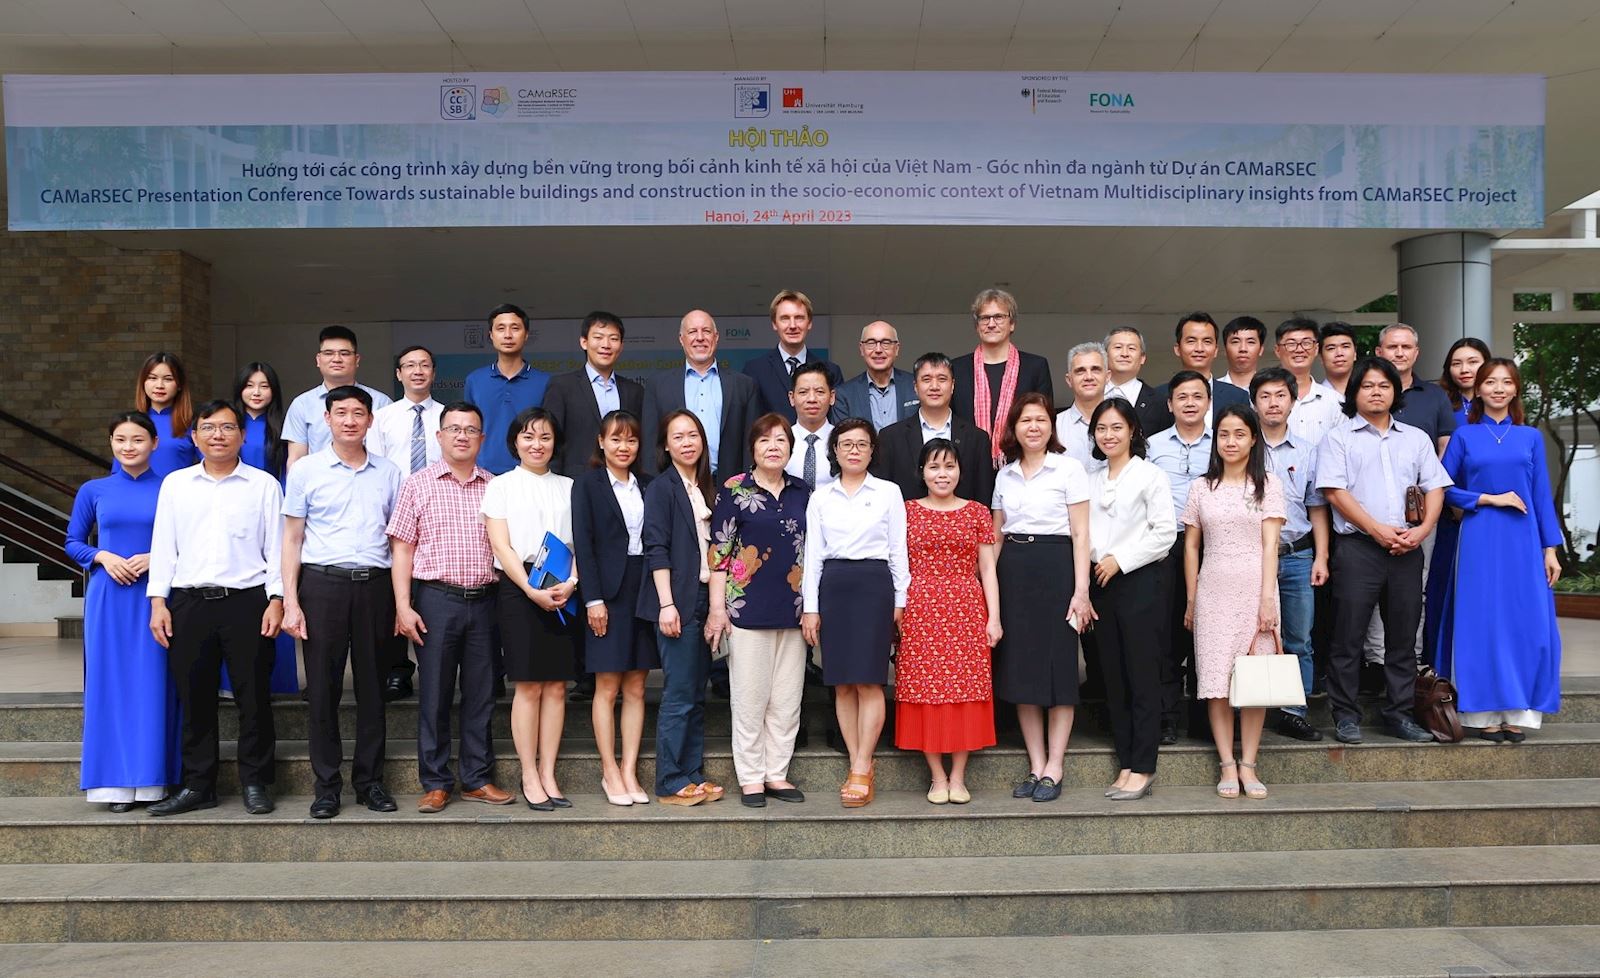 CAMARSEC PROJECT SEMINAR: TOWARDS SUSTAINABLE CONSTRUCTIONS IN THE SOCIO-ECONOMIC CONTEXT OF VIETNAM – A MULTIDISCIPLINARY PERSPECTIVE FROM THE CAMARSEC PROJECT